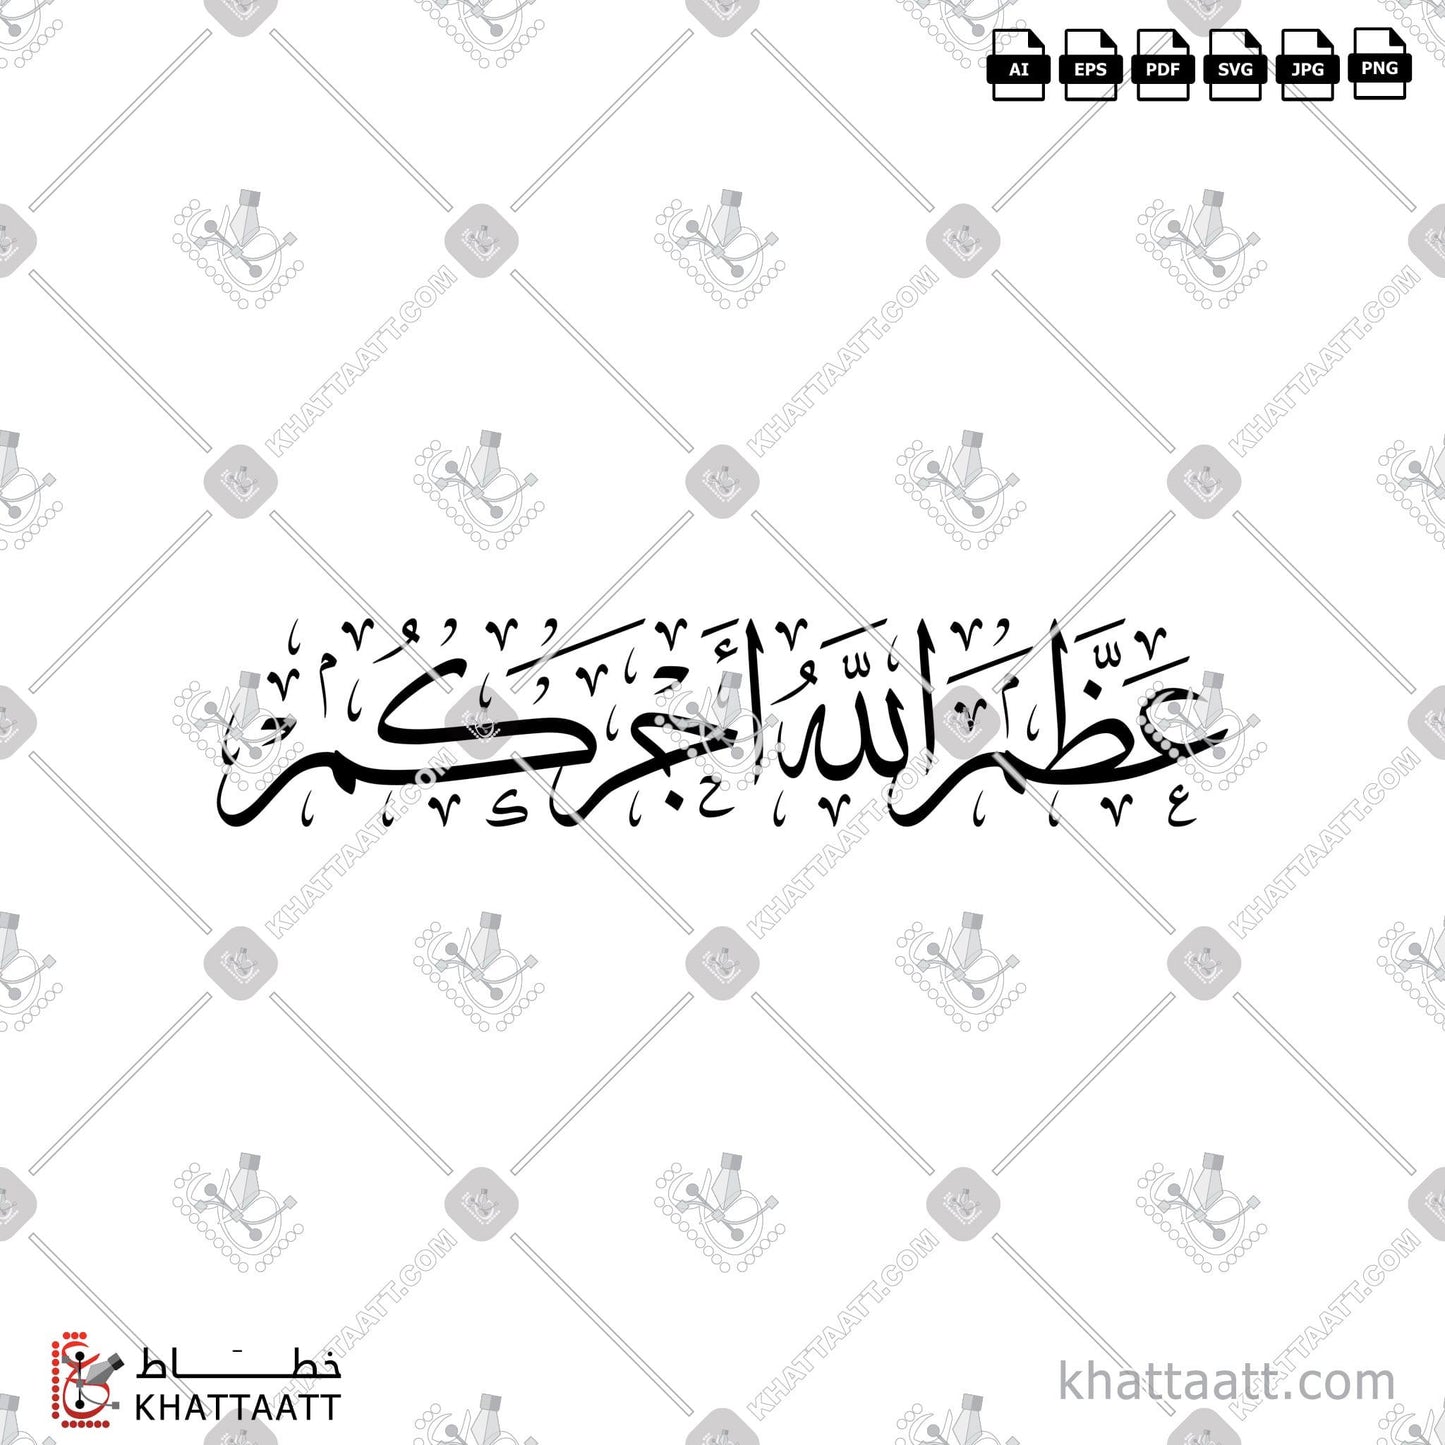 Download Arabic Calligraphy of عظم الله أجركم in Thuluth - خط الثلث in vector and .png